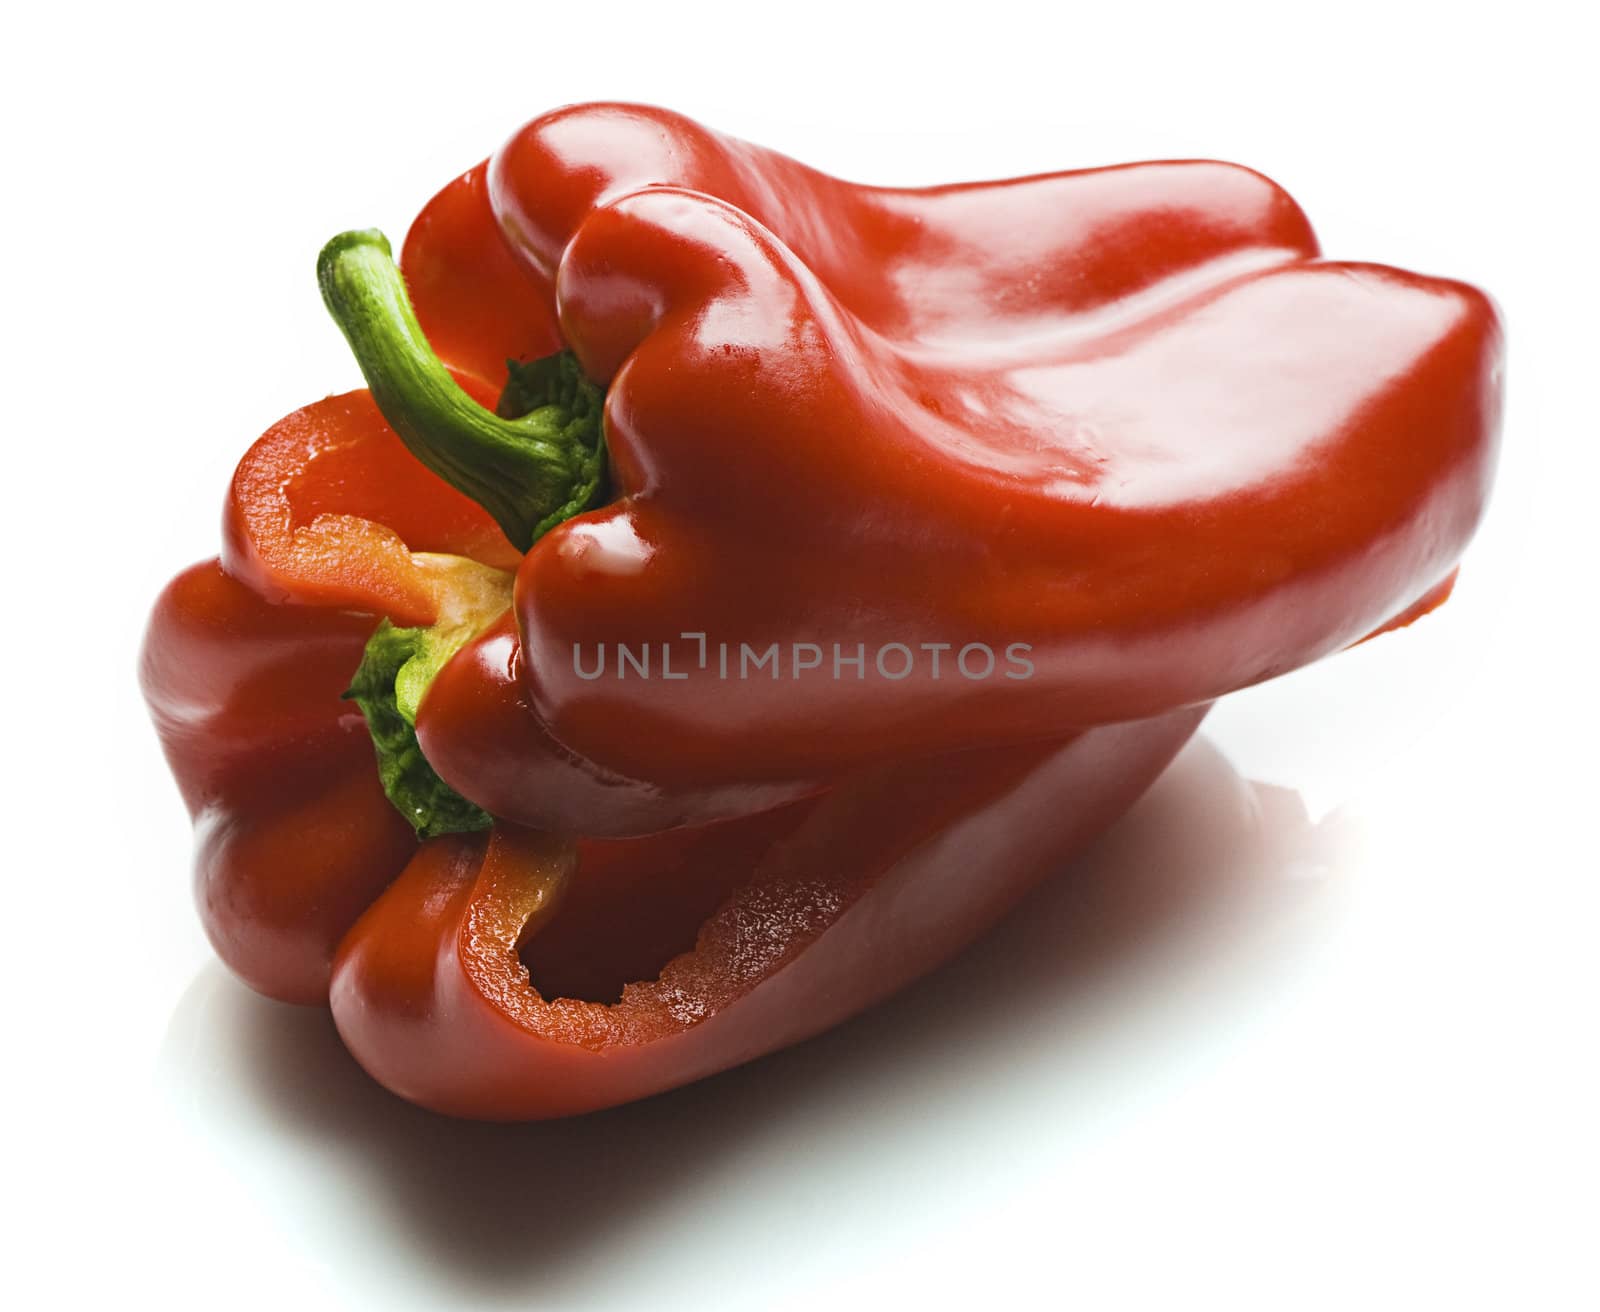 A red capsicum sliced in half and piled on each other. Isolated on white.